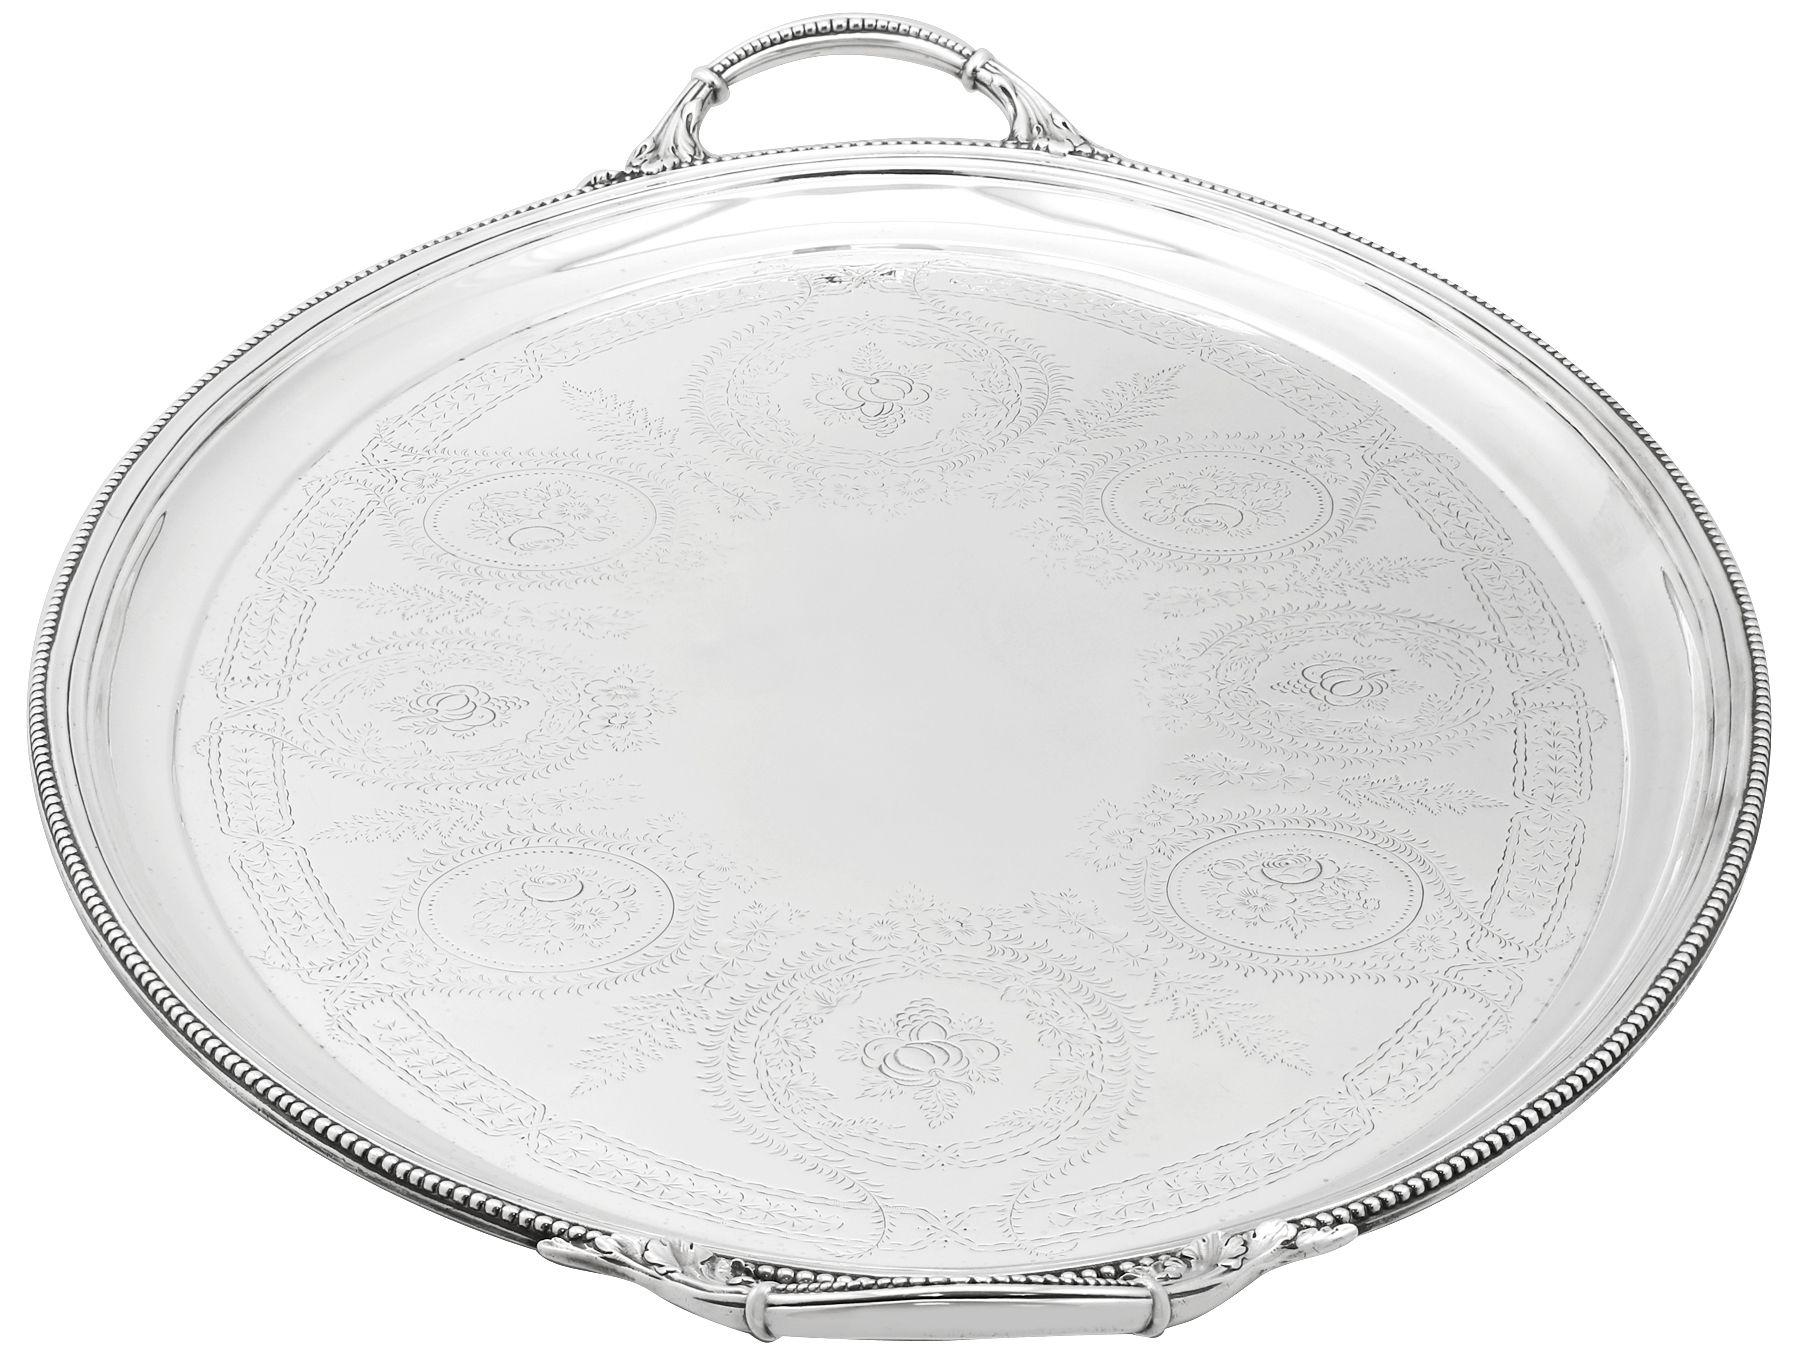 Antique Victorian Sterling Silver Tea Tray by Walter & John Barnard In Good Condition For Sale In Jesmond, Newcastle Upon Tyne